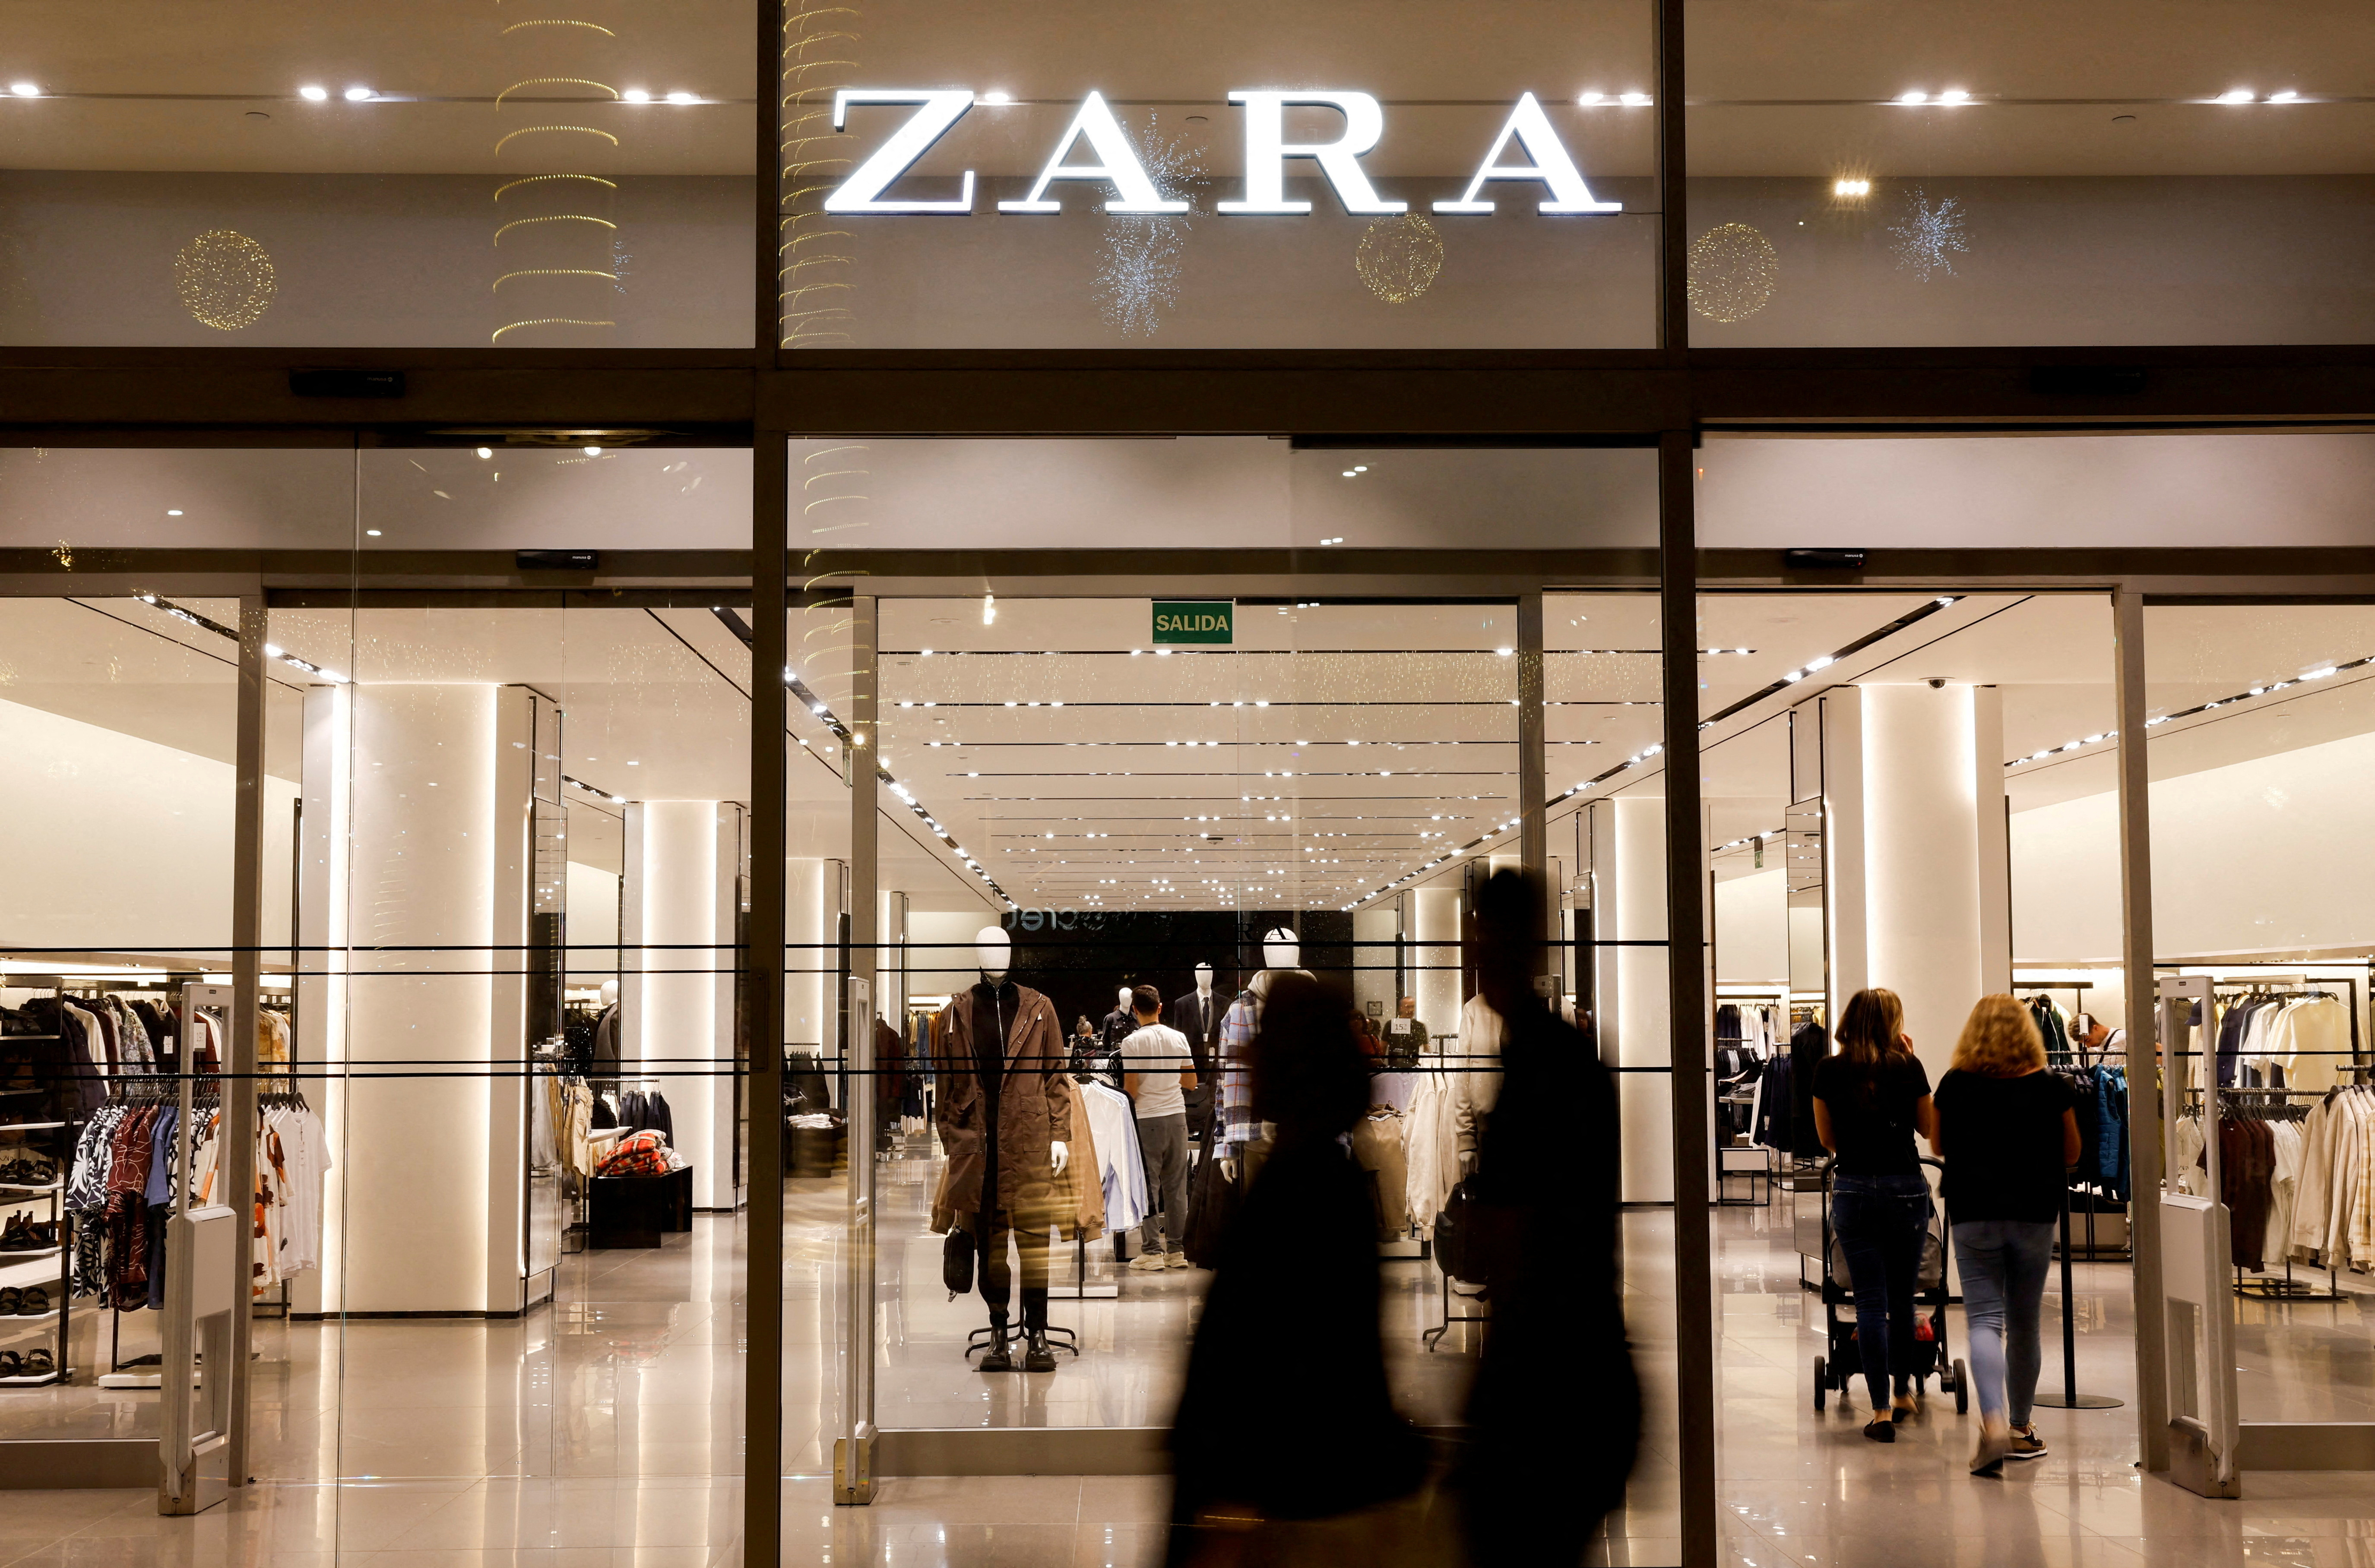 Zara to return to Ukraine after 2-year closure, FT reports